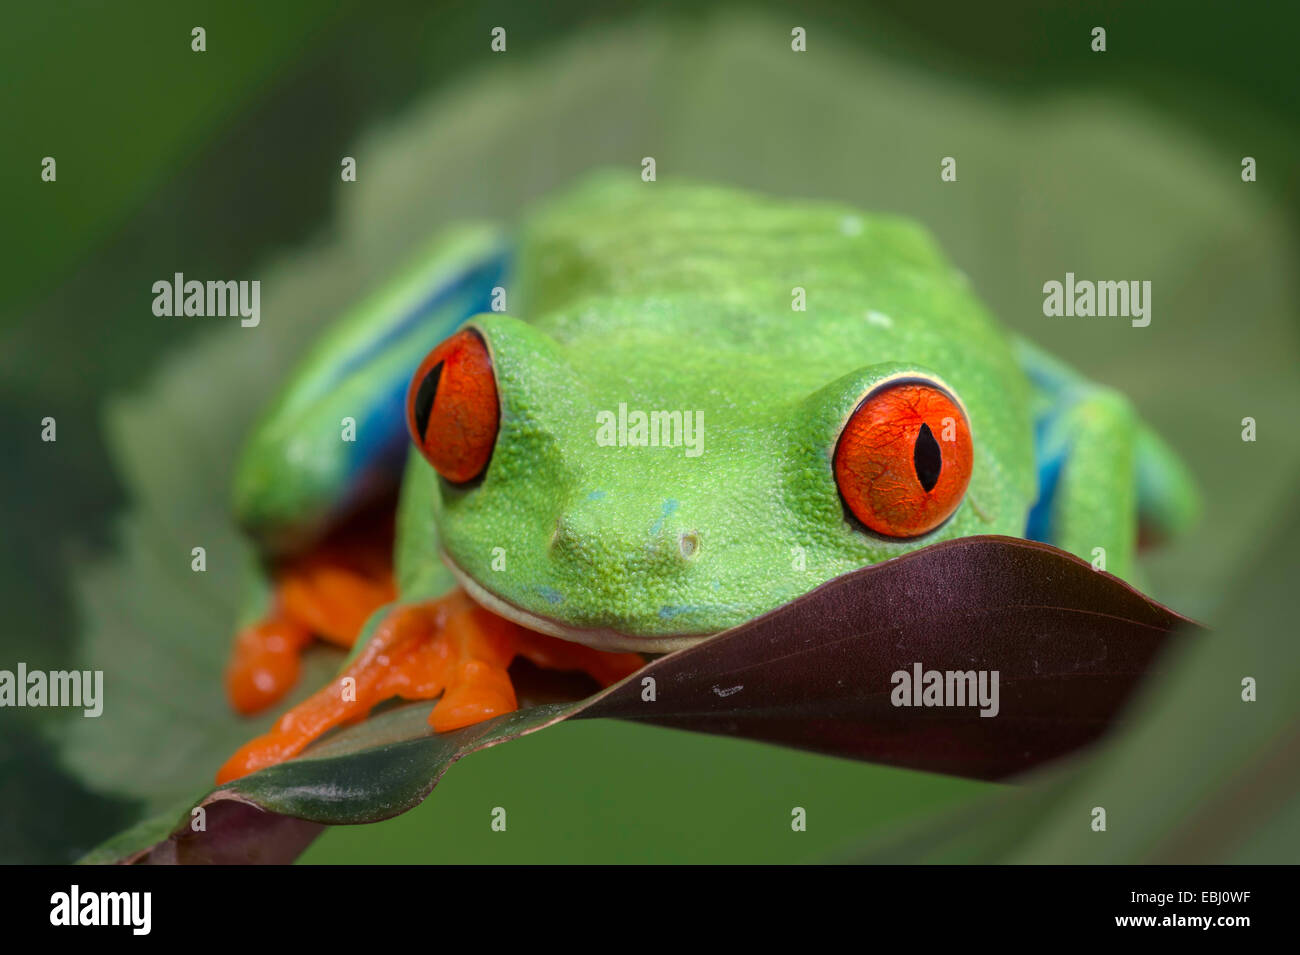 Red-Eyed Leaf Frog hiding on a leaf looking into the camera Stock Photo